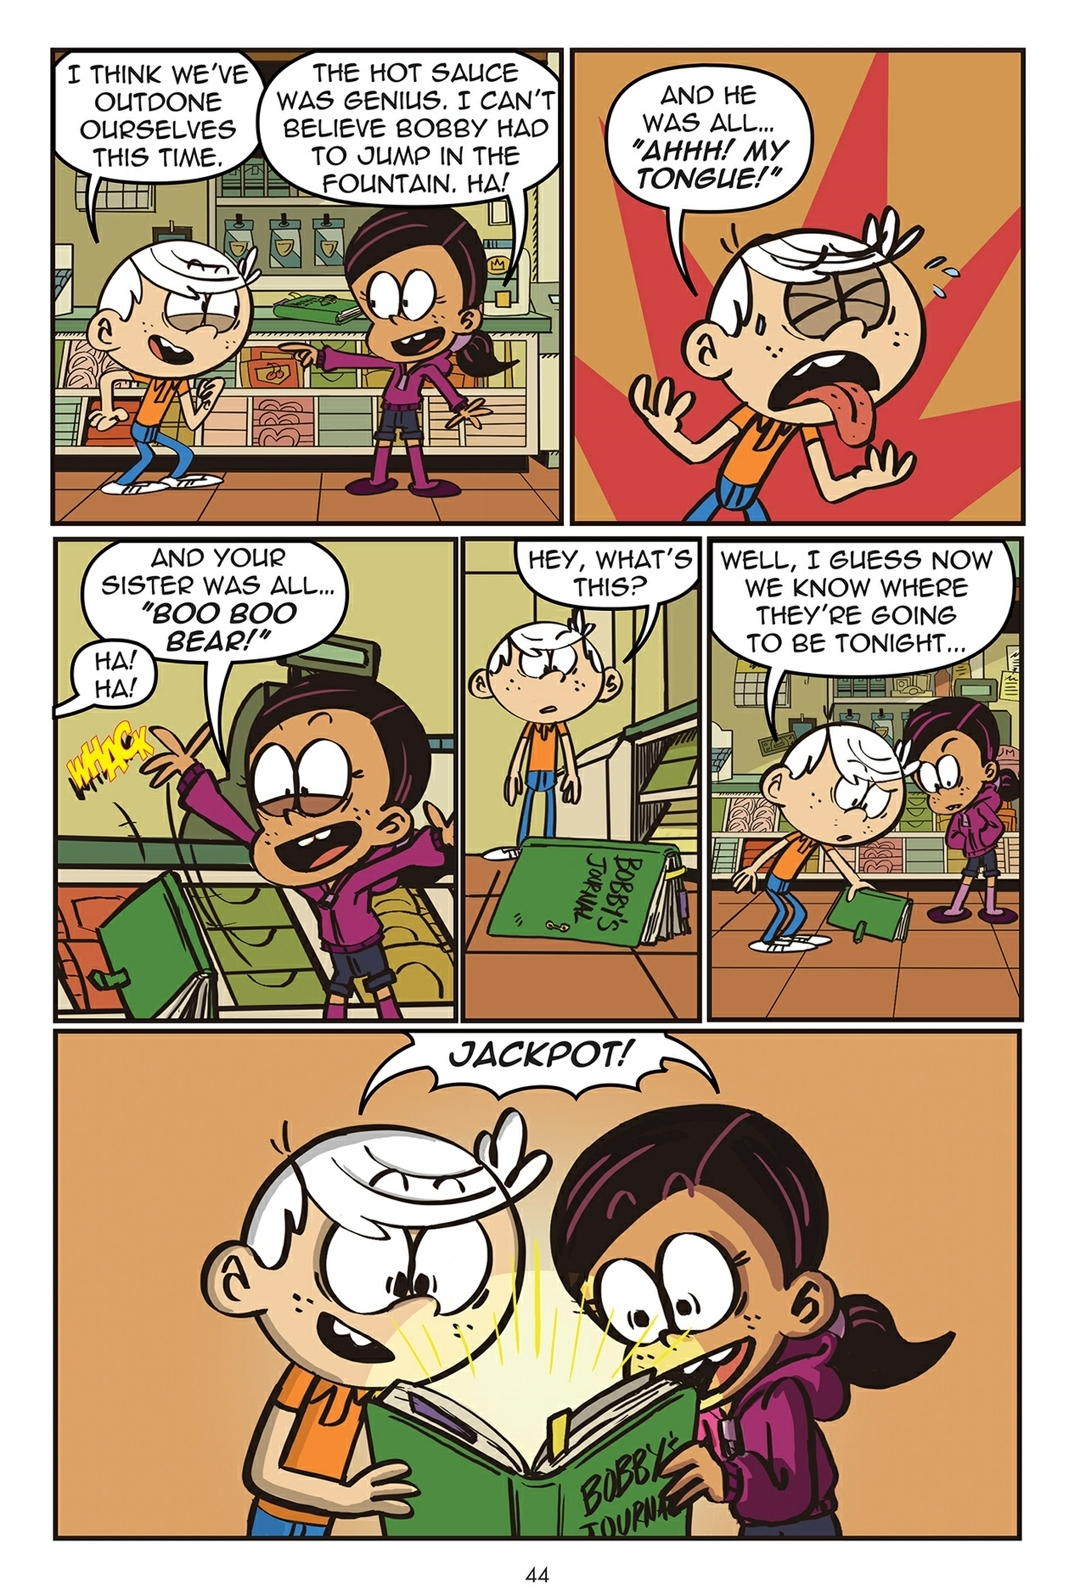 The Loud House 08 Read All Comics Online For Free 